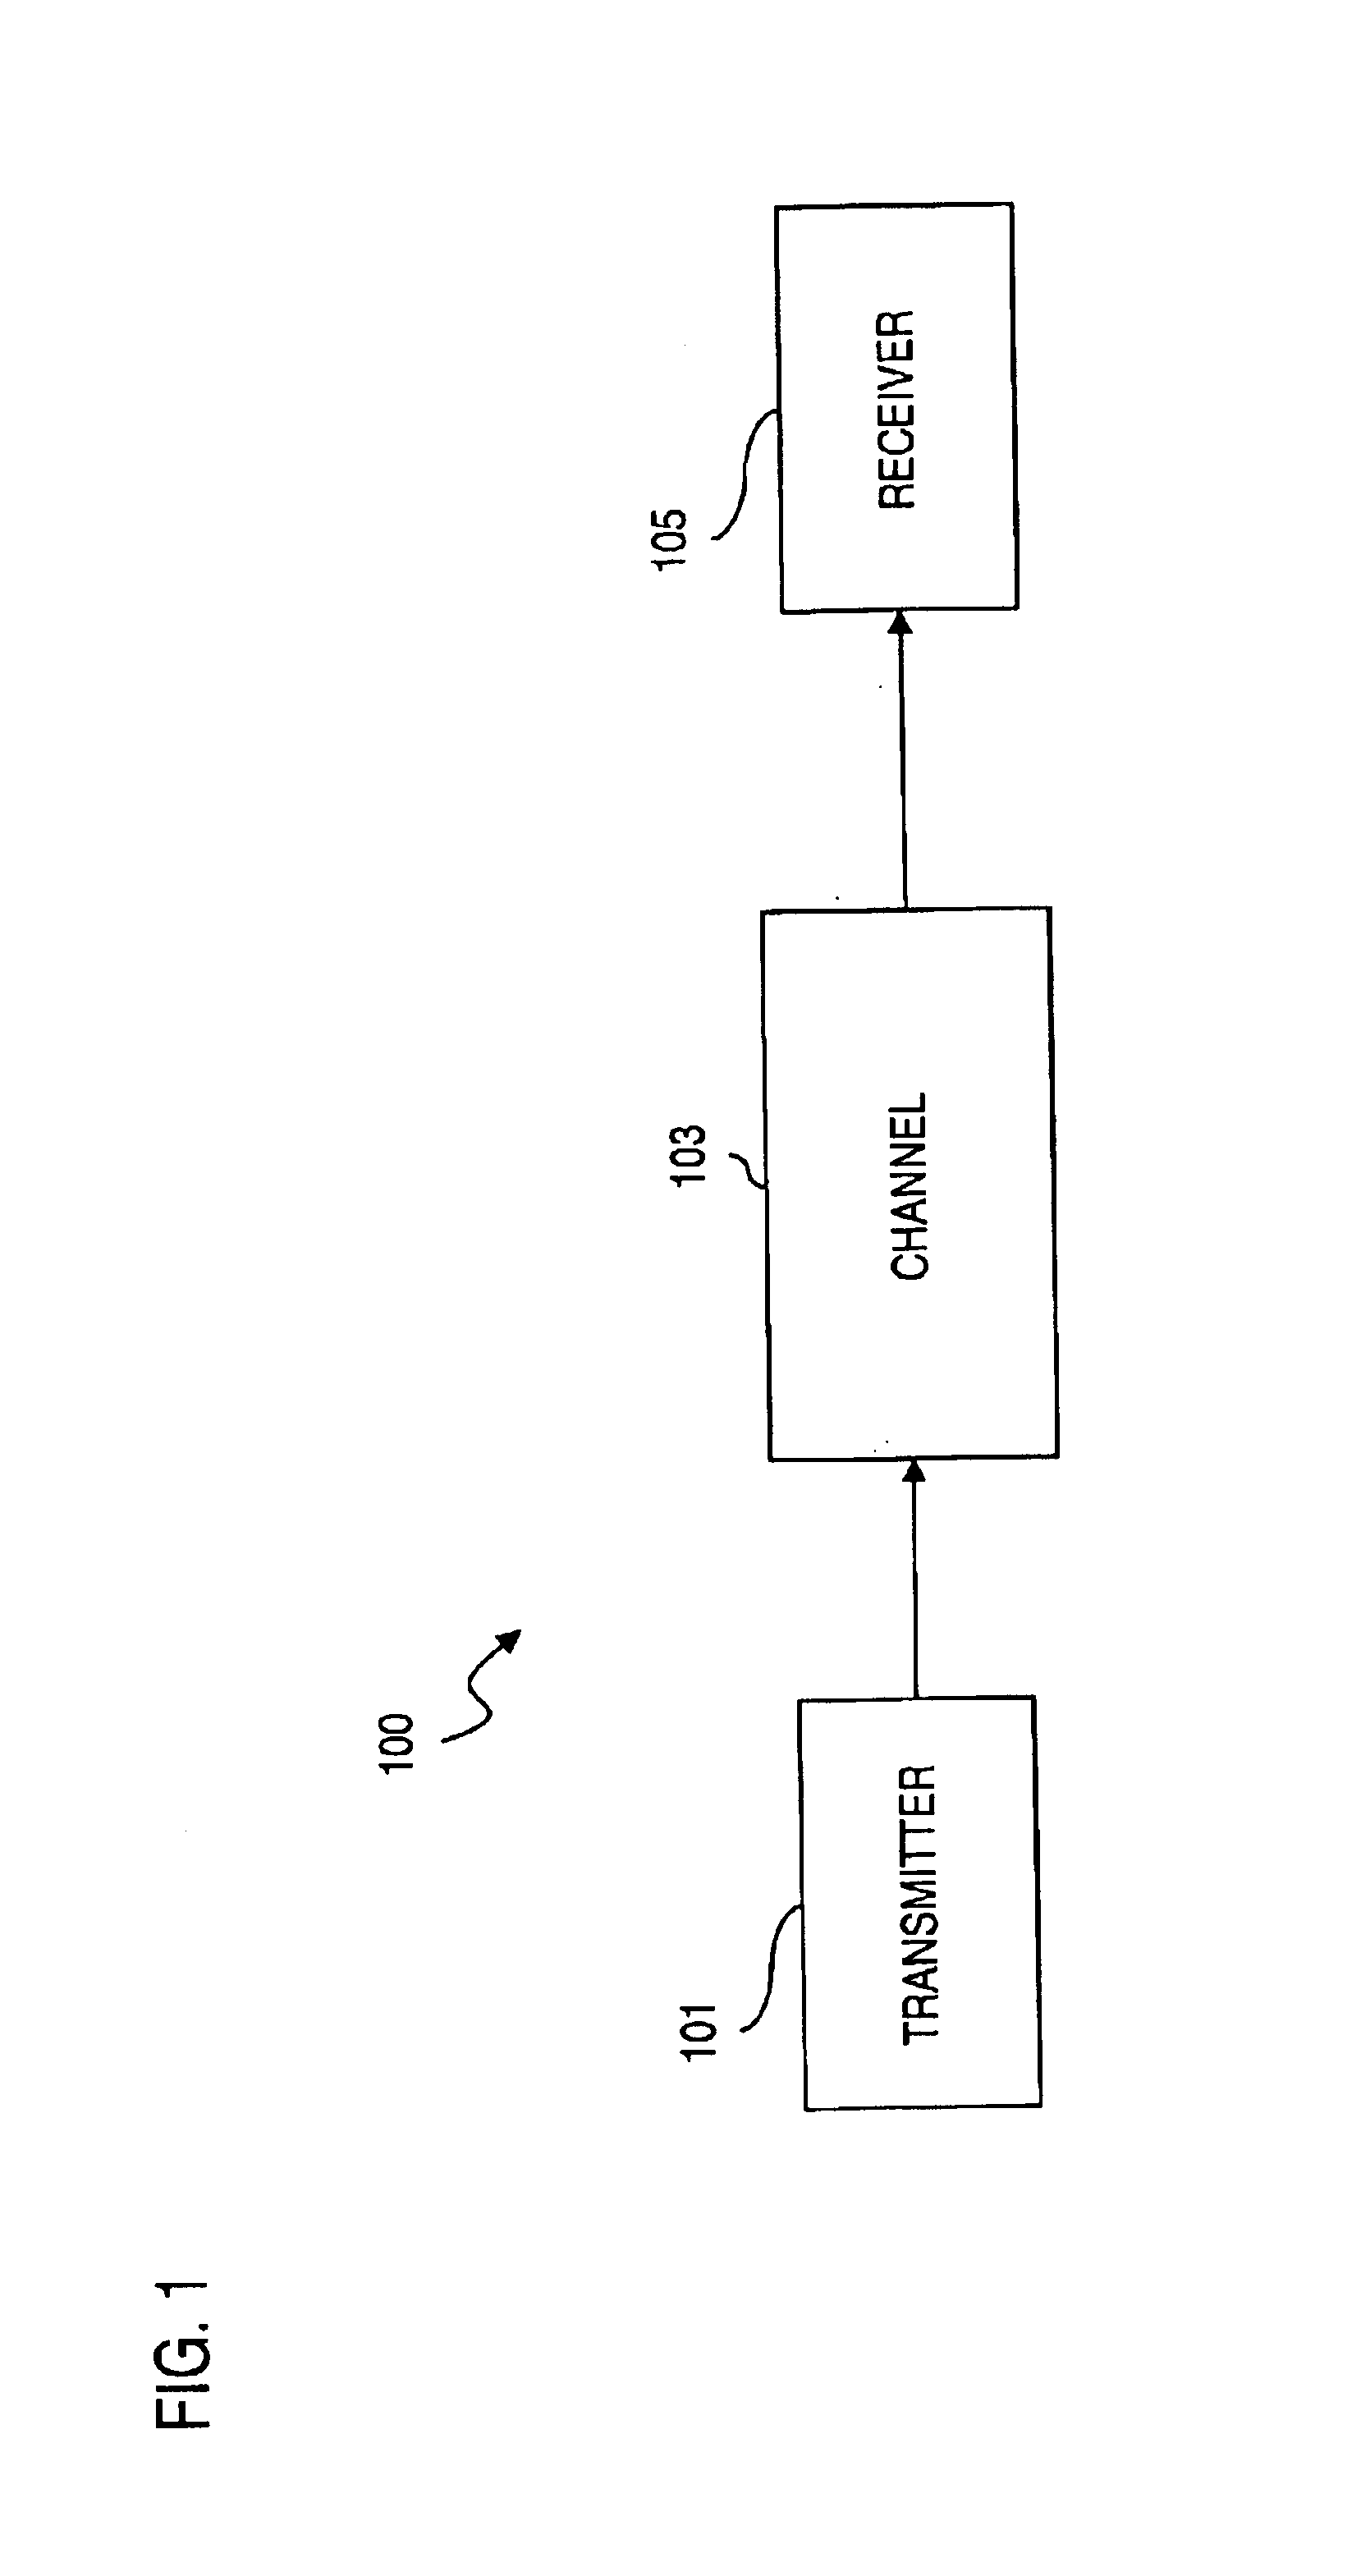 Method and system for decoding low density parity check (LDPC) codes